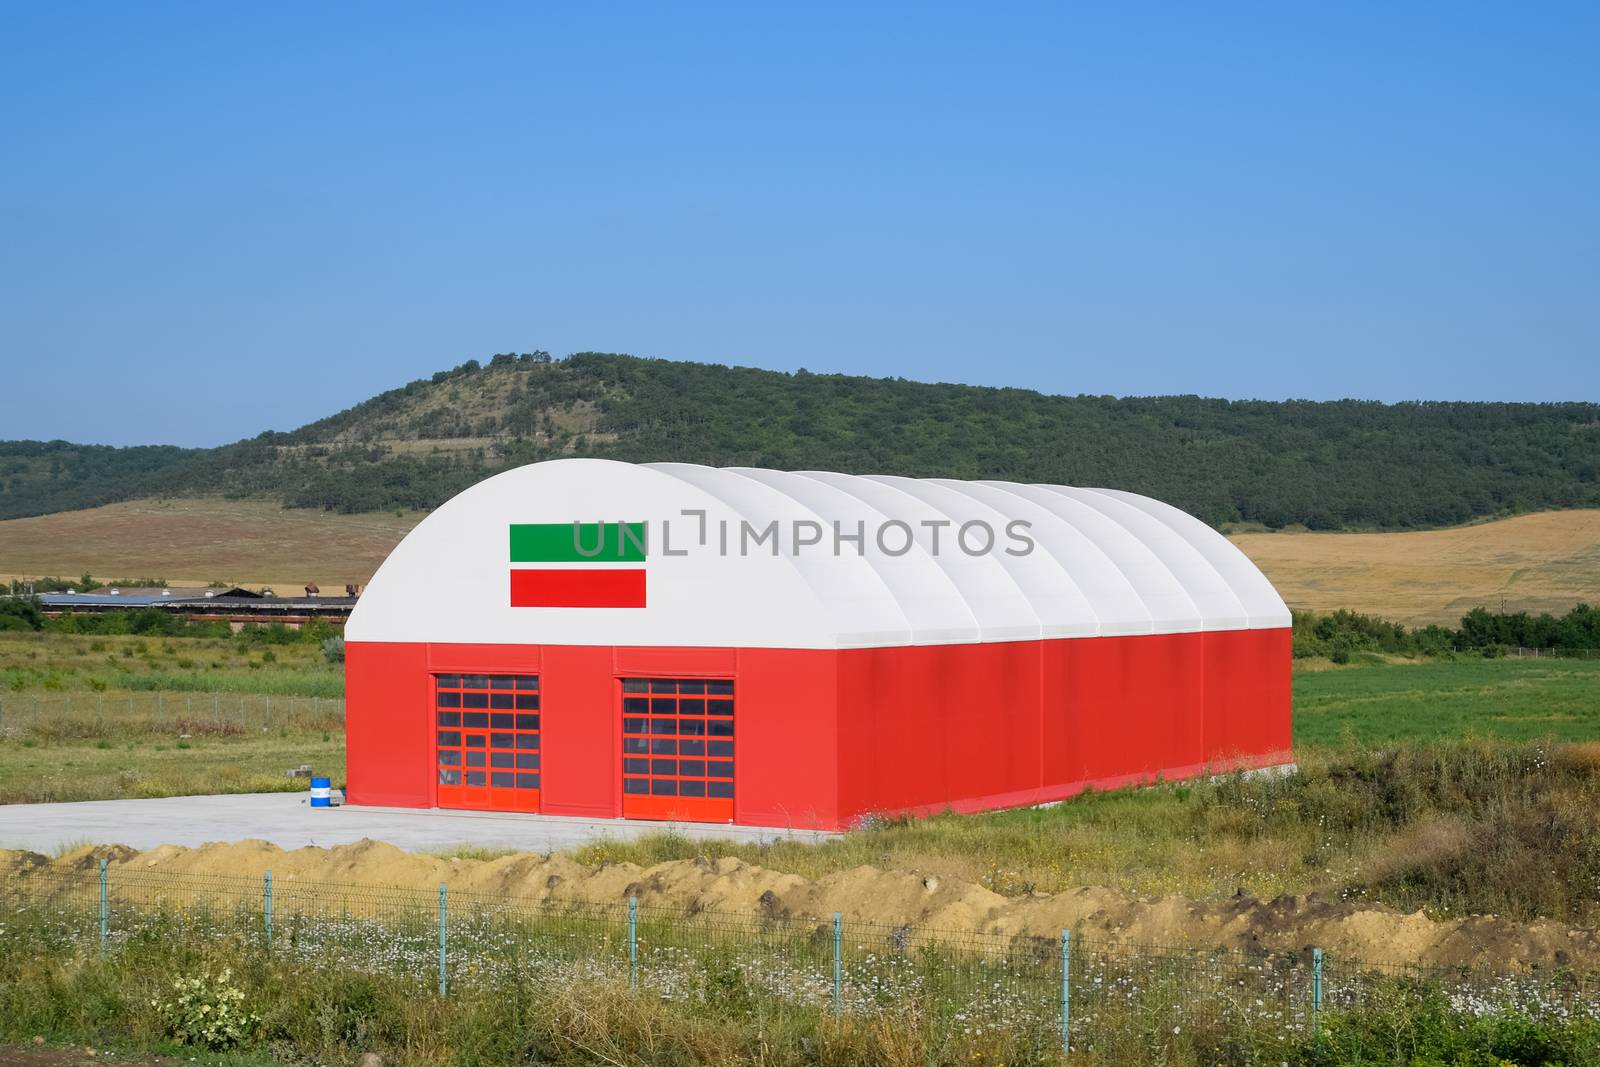 The hangar is white and red. An hangar in a field.